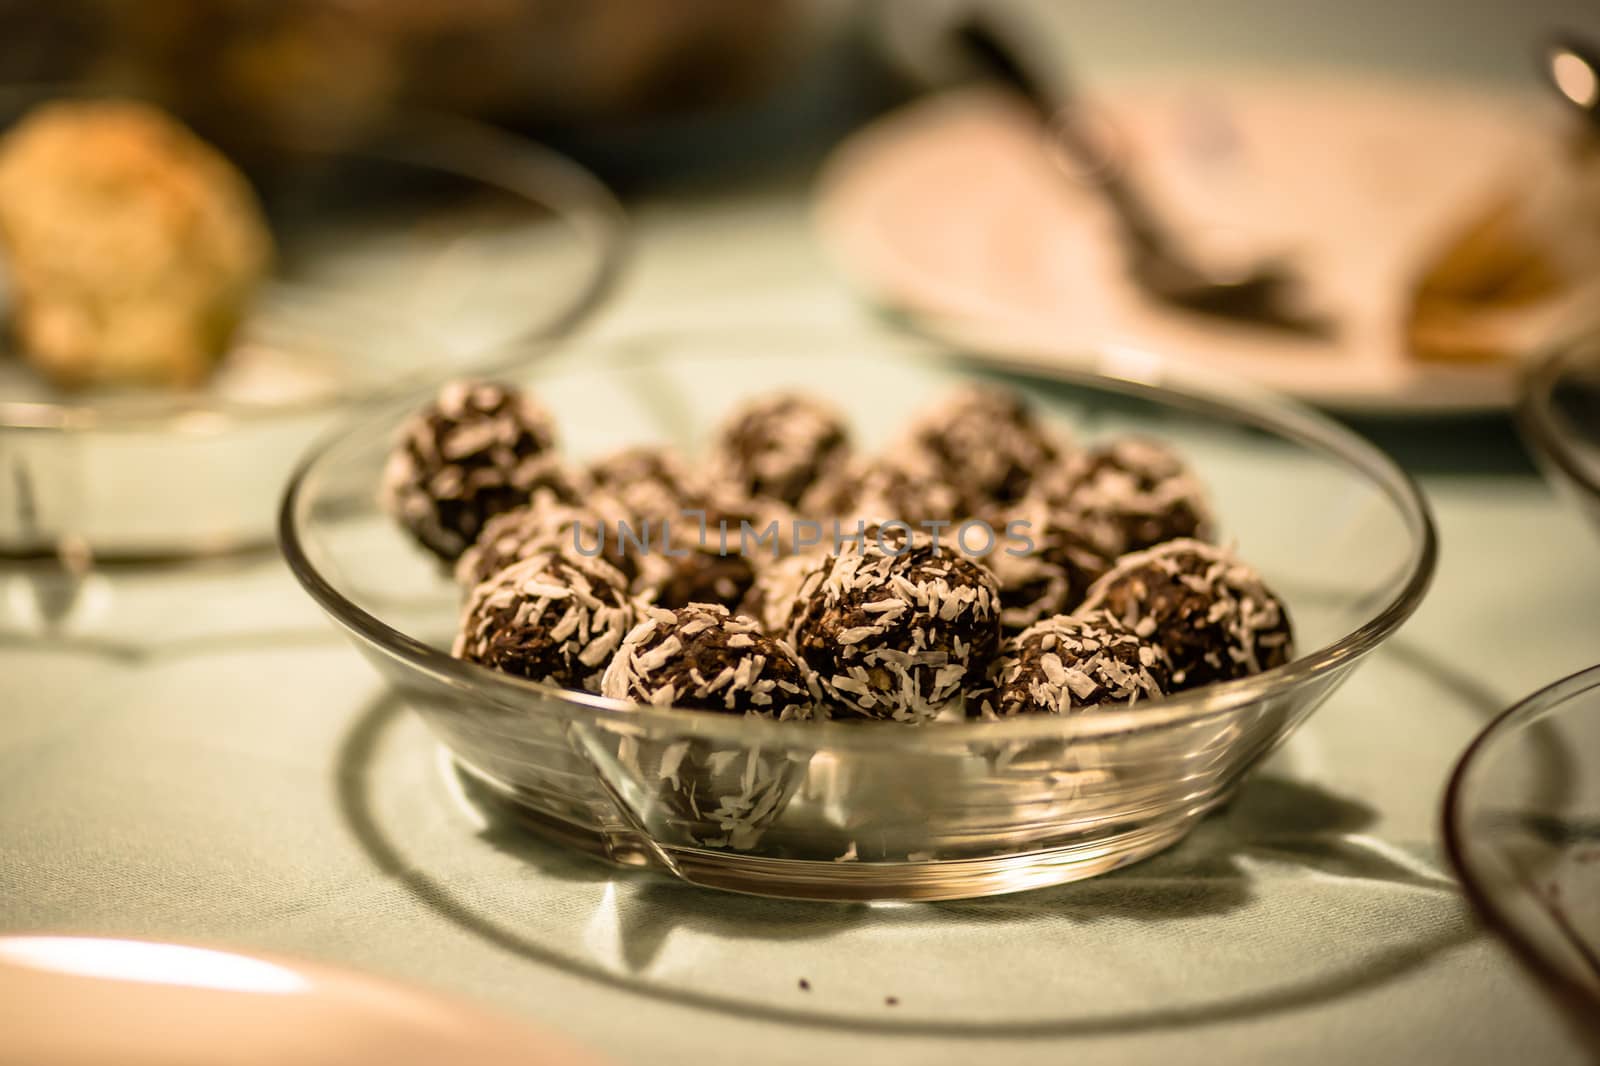 Coconut and chocolate confectionery served at christmas time